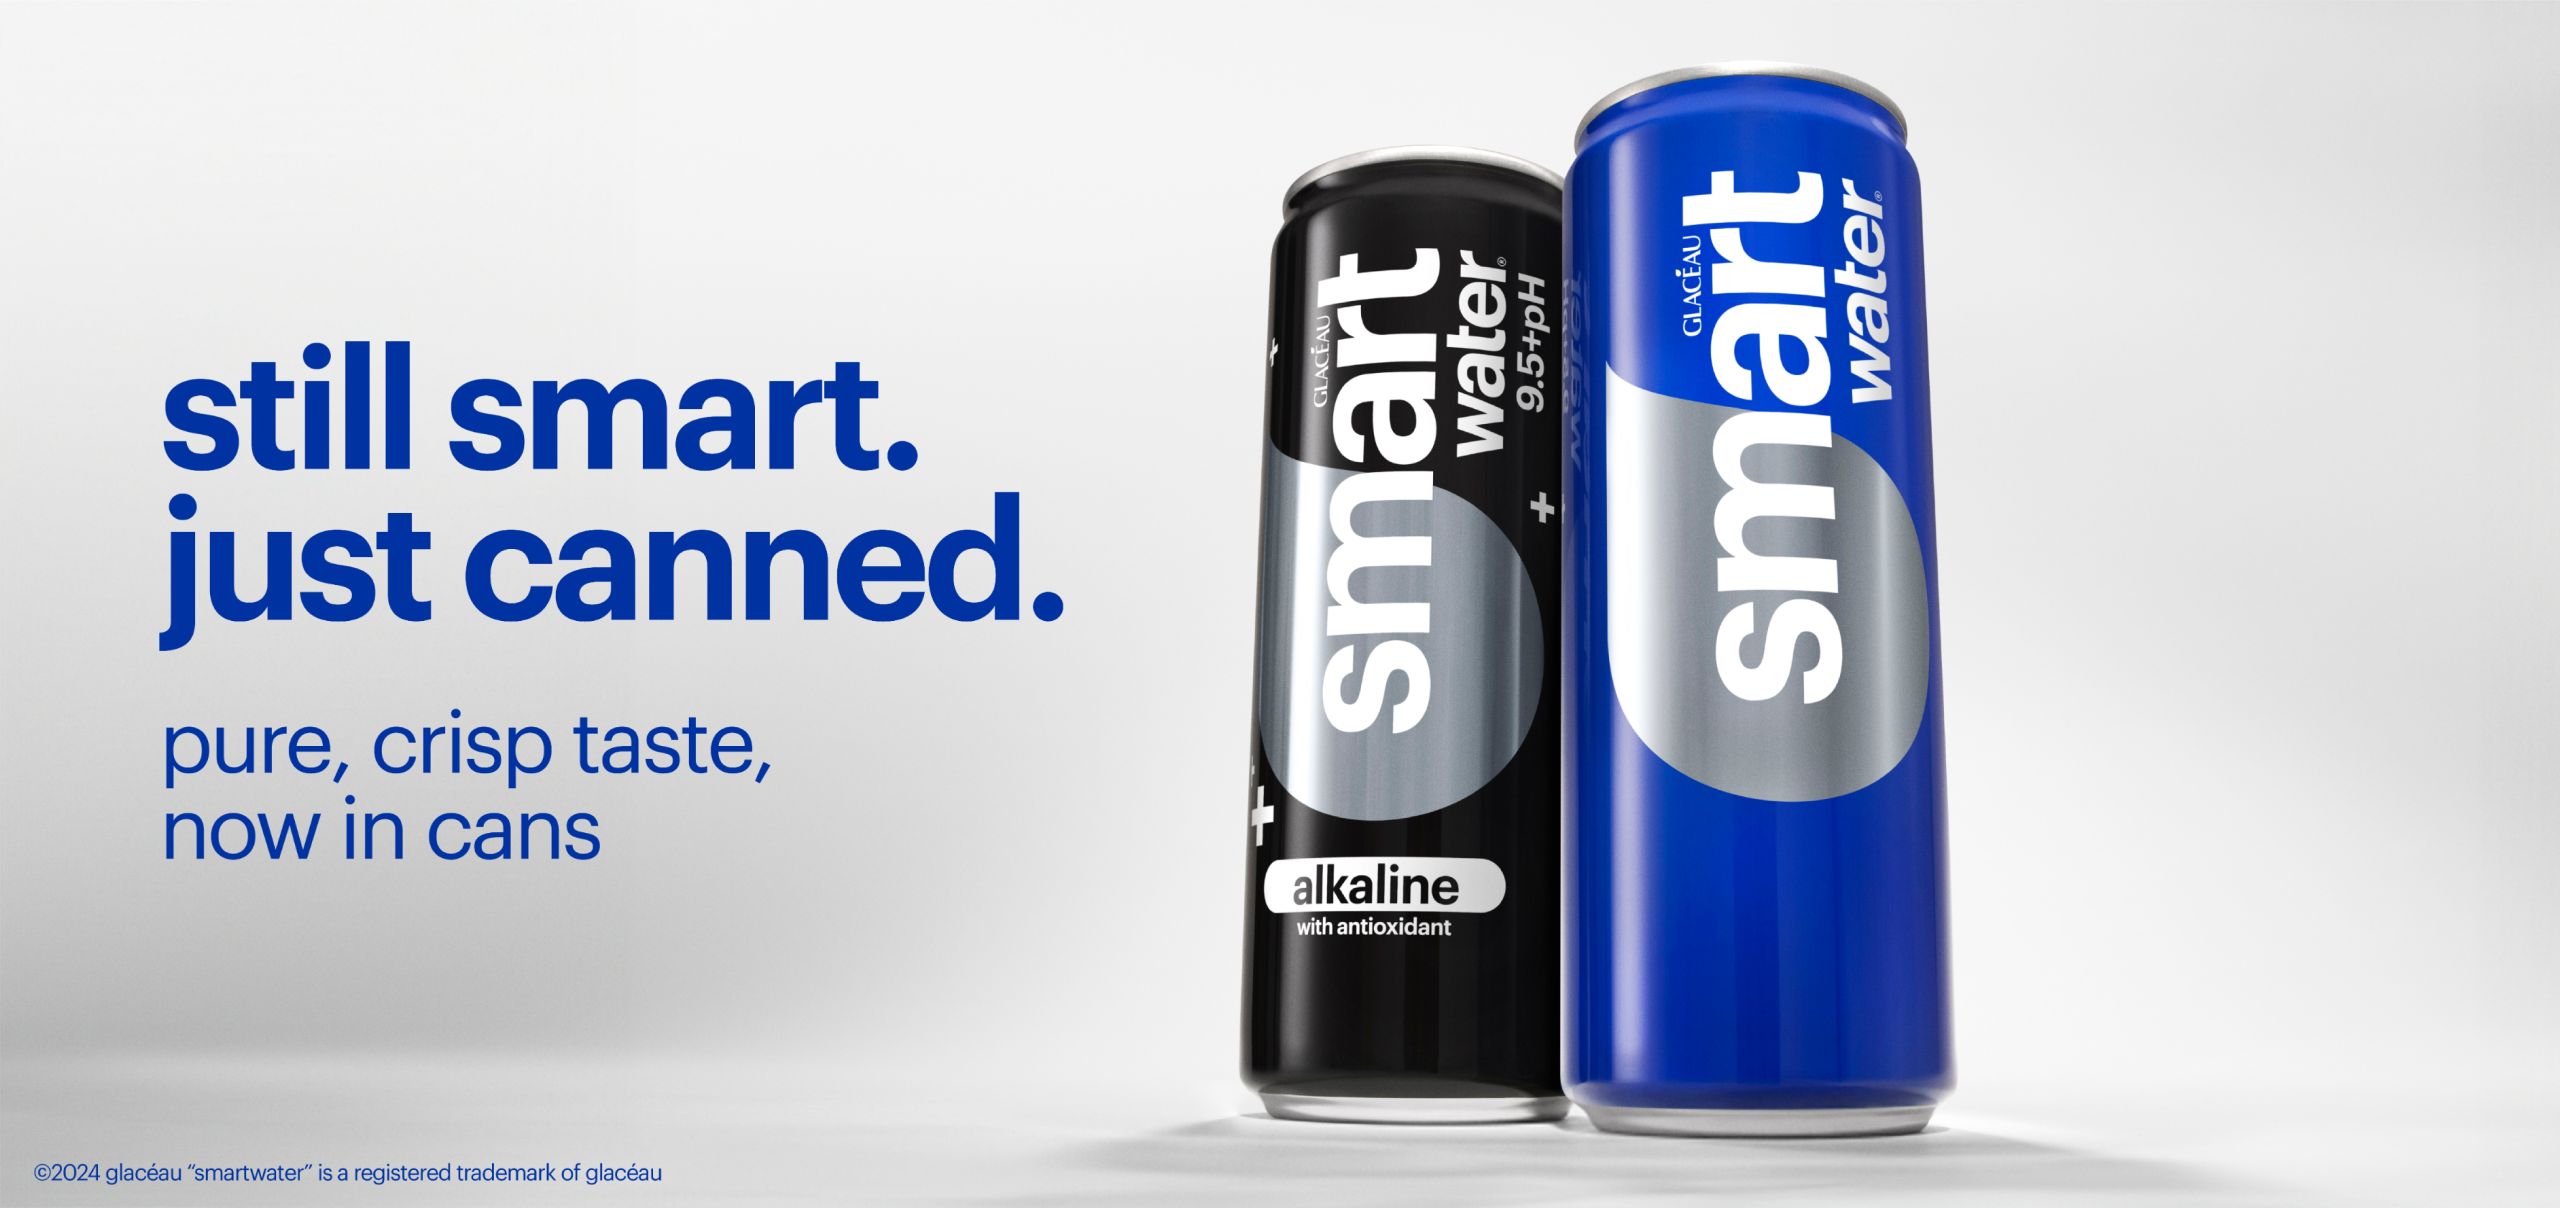 two cans of smart water with text that says: still smart. just canned. pure crisp taste now in cans